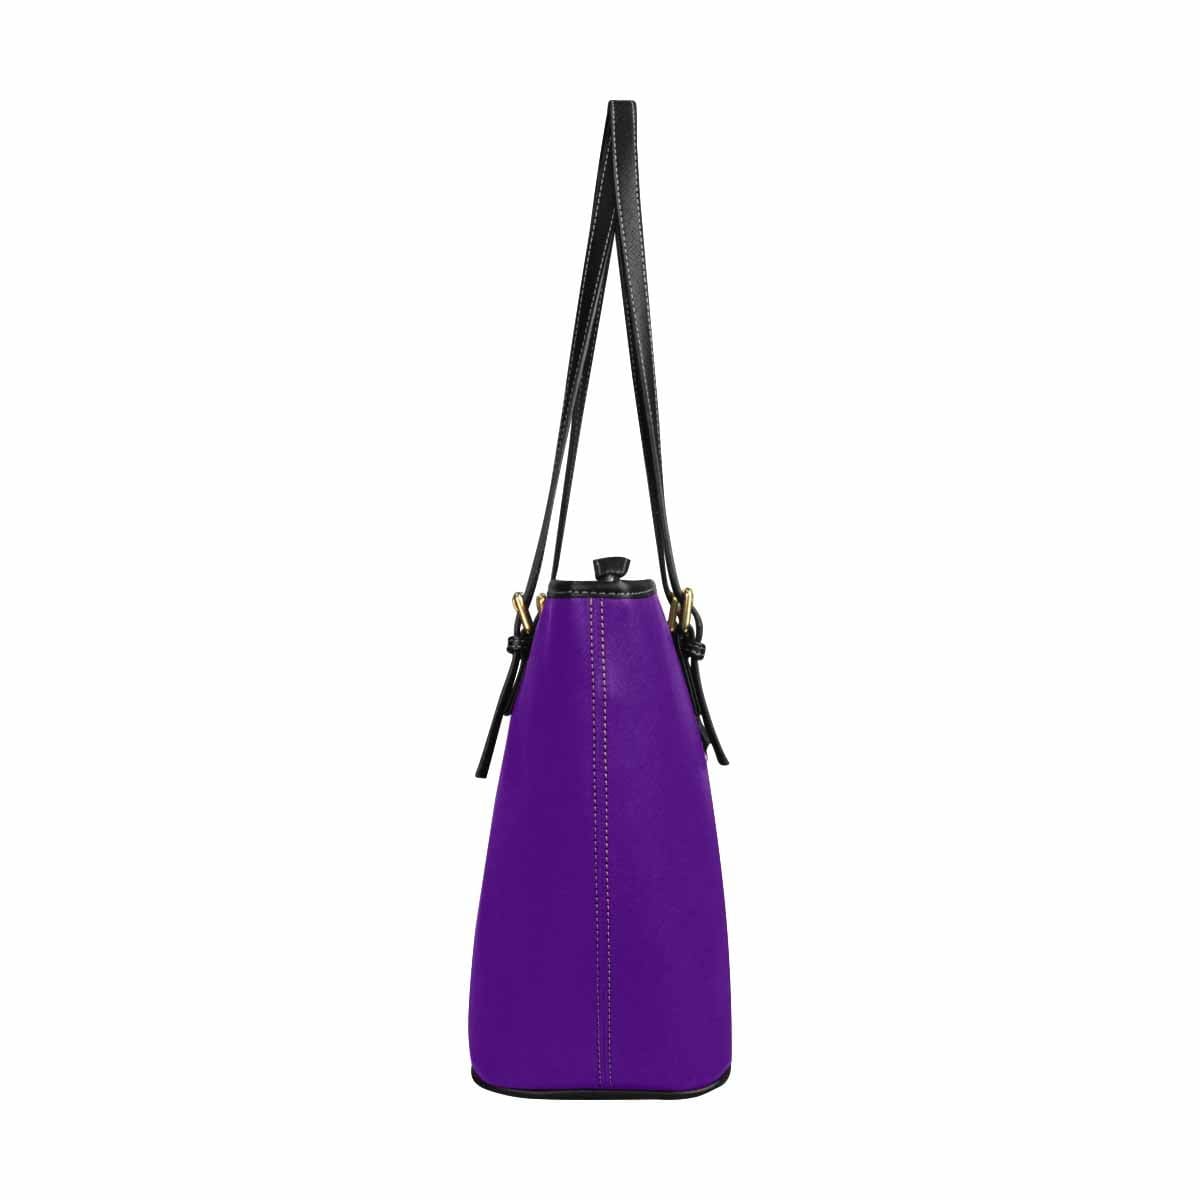 Large Leather Tote Shoulder Bag - Indigo Purple - Bags | Leather Tote Bags